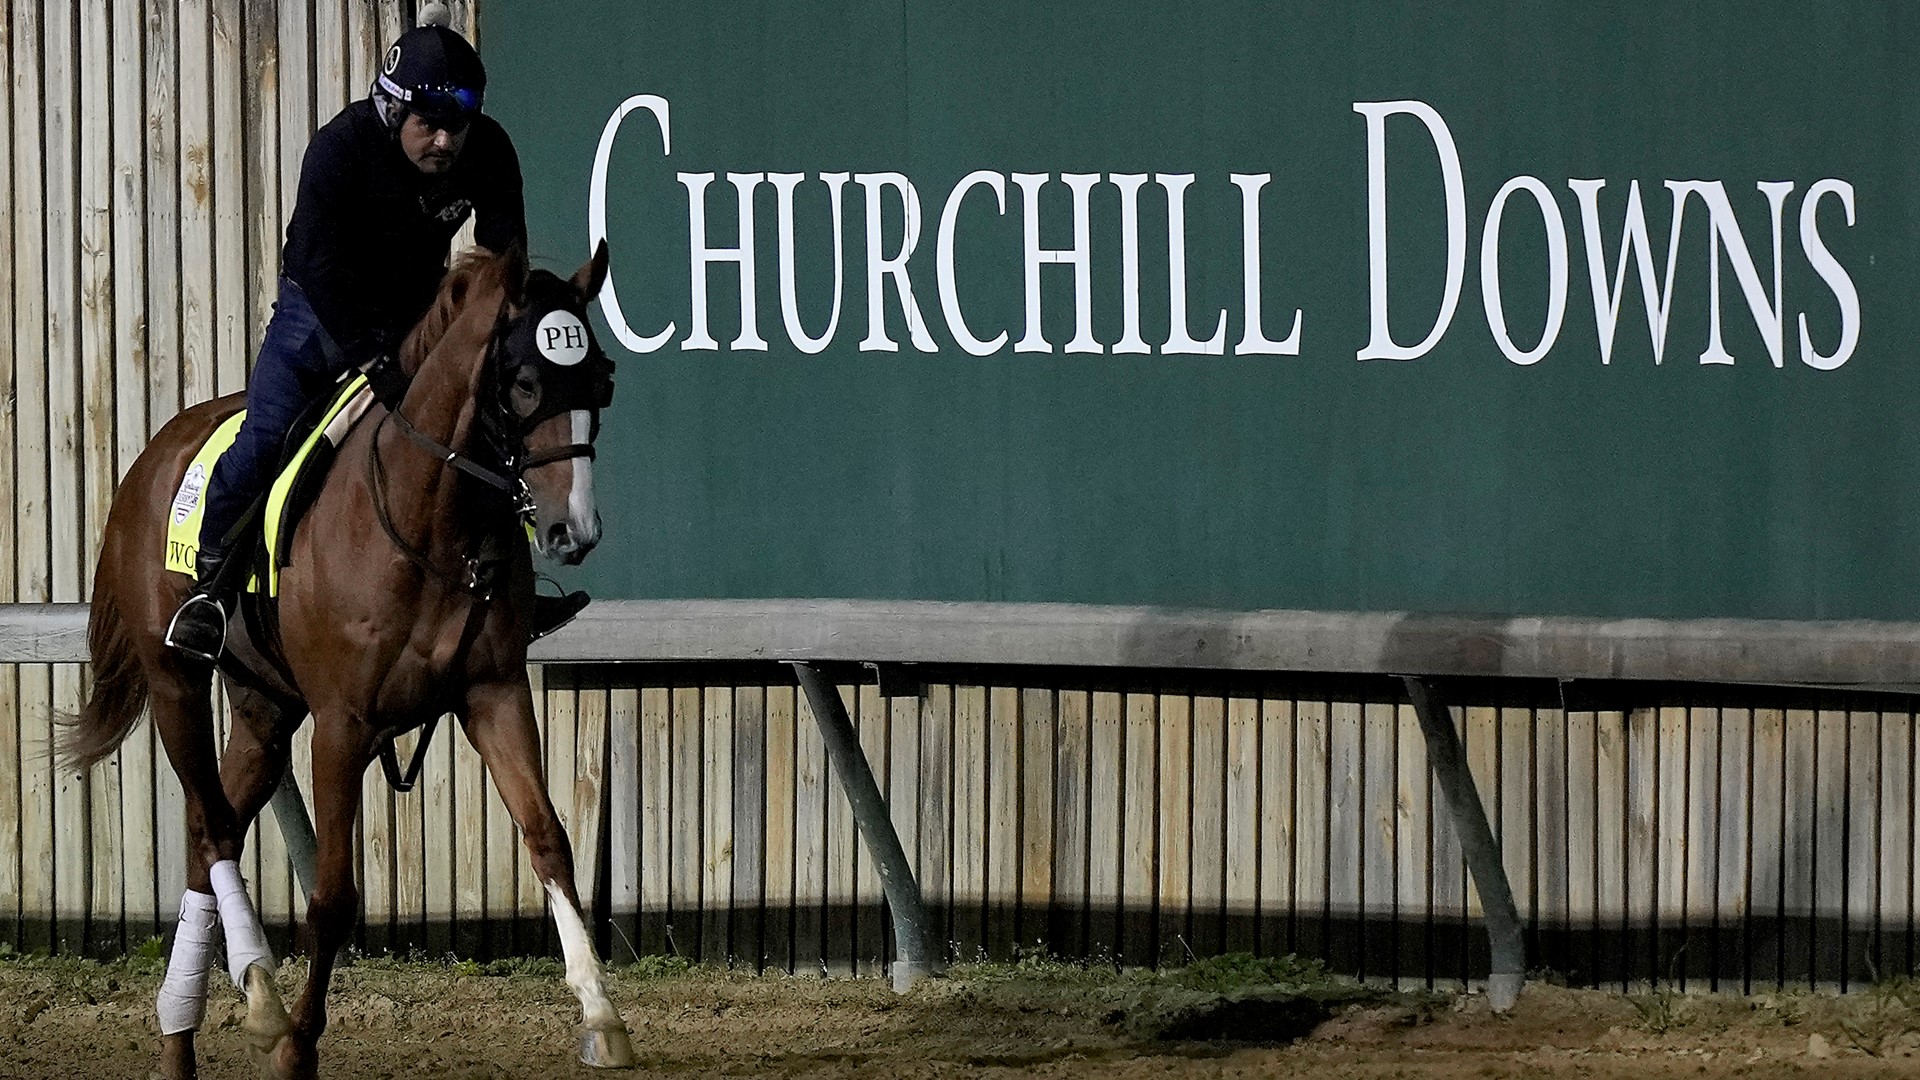 The 150th running of the Kentucky Derby takes place Saturday, May 4, at Churchill Downs.